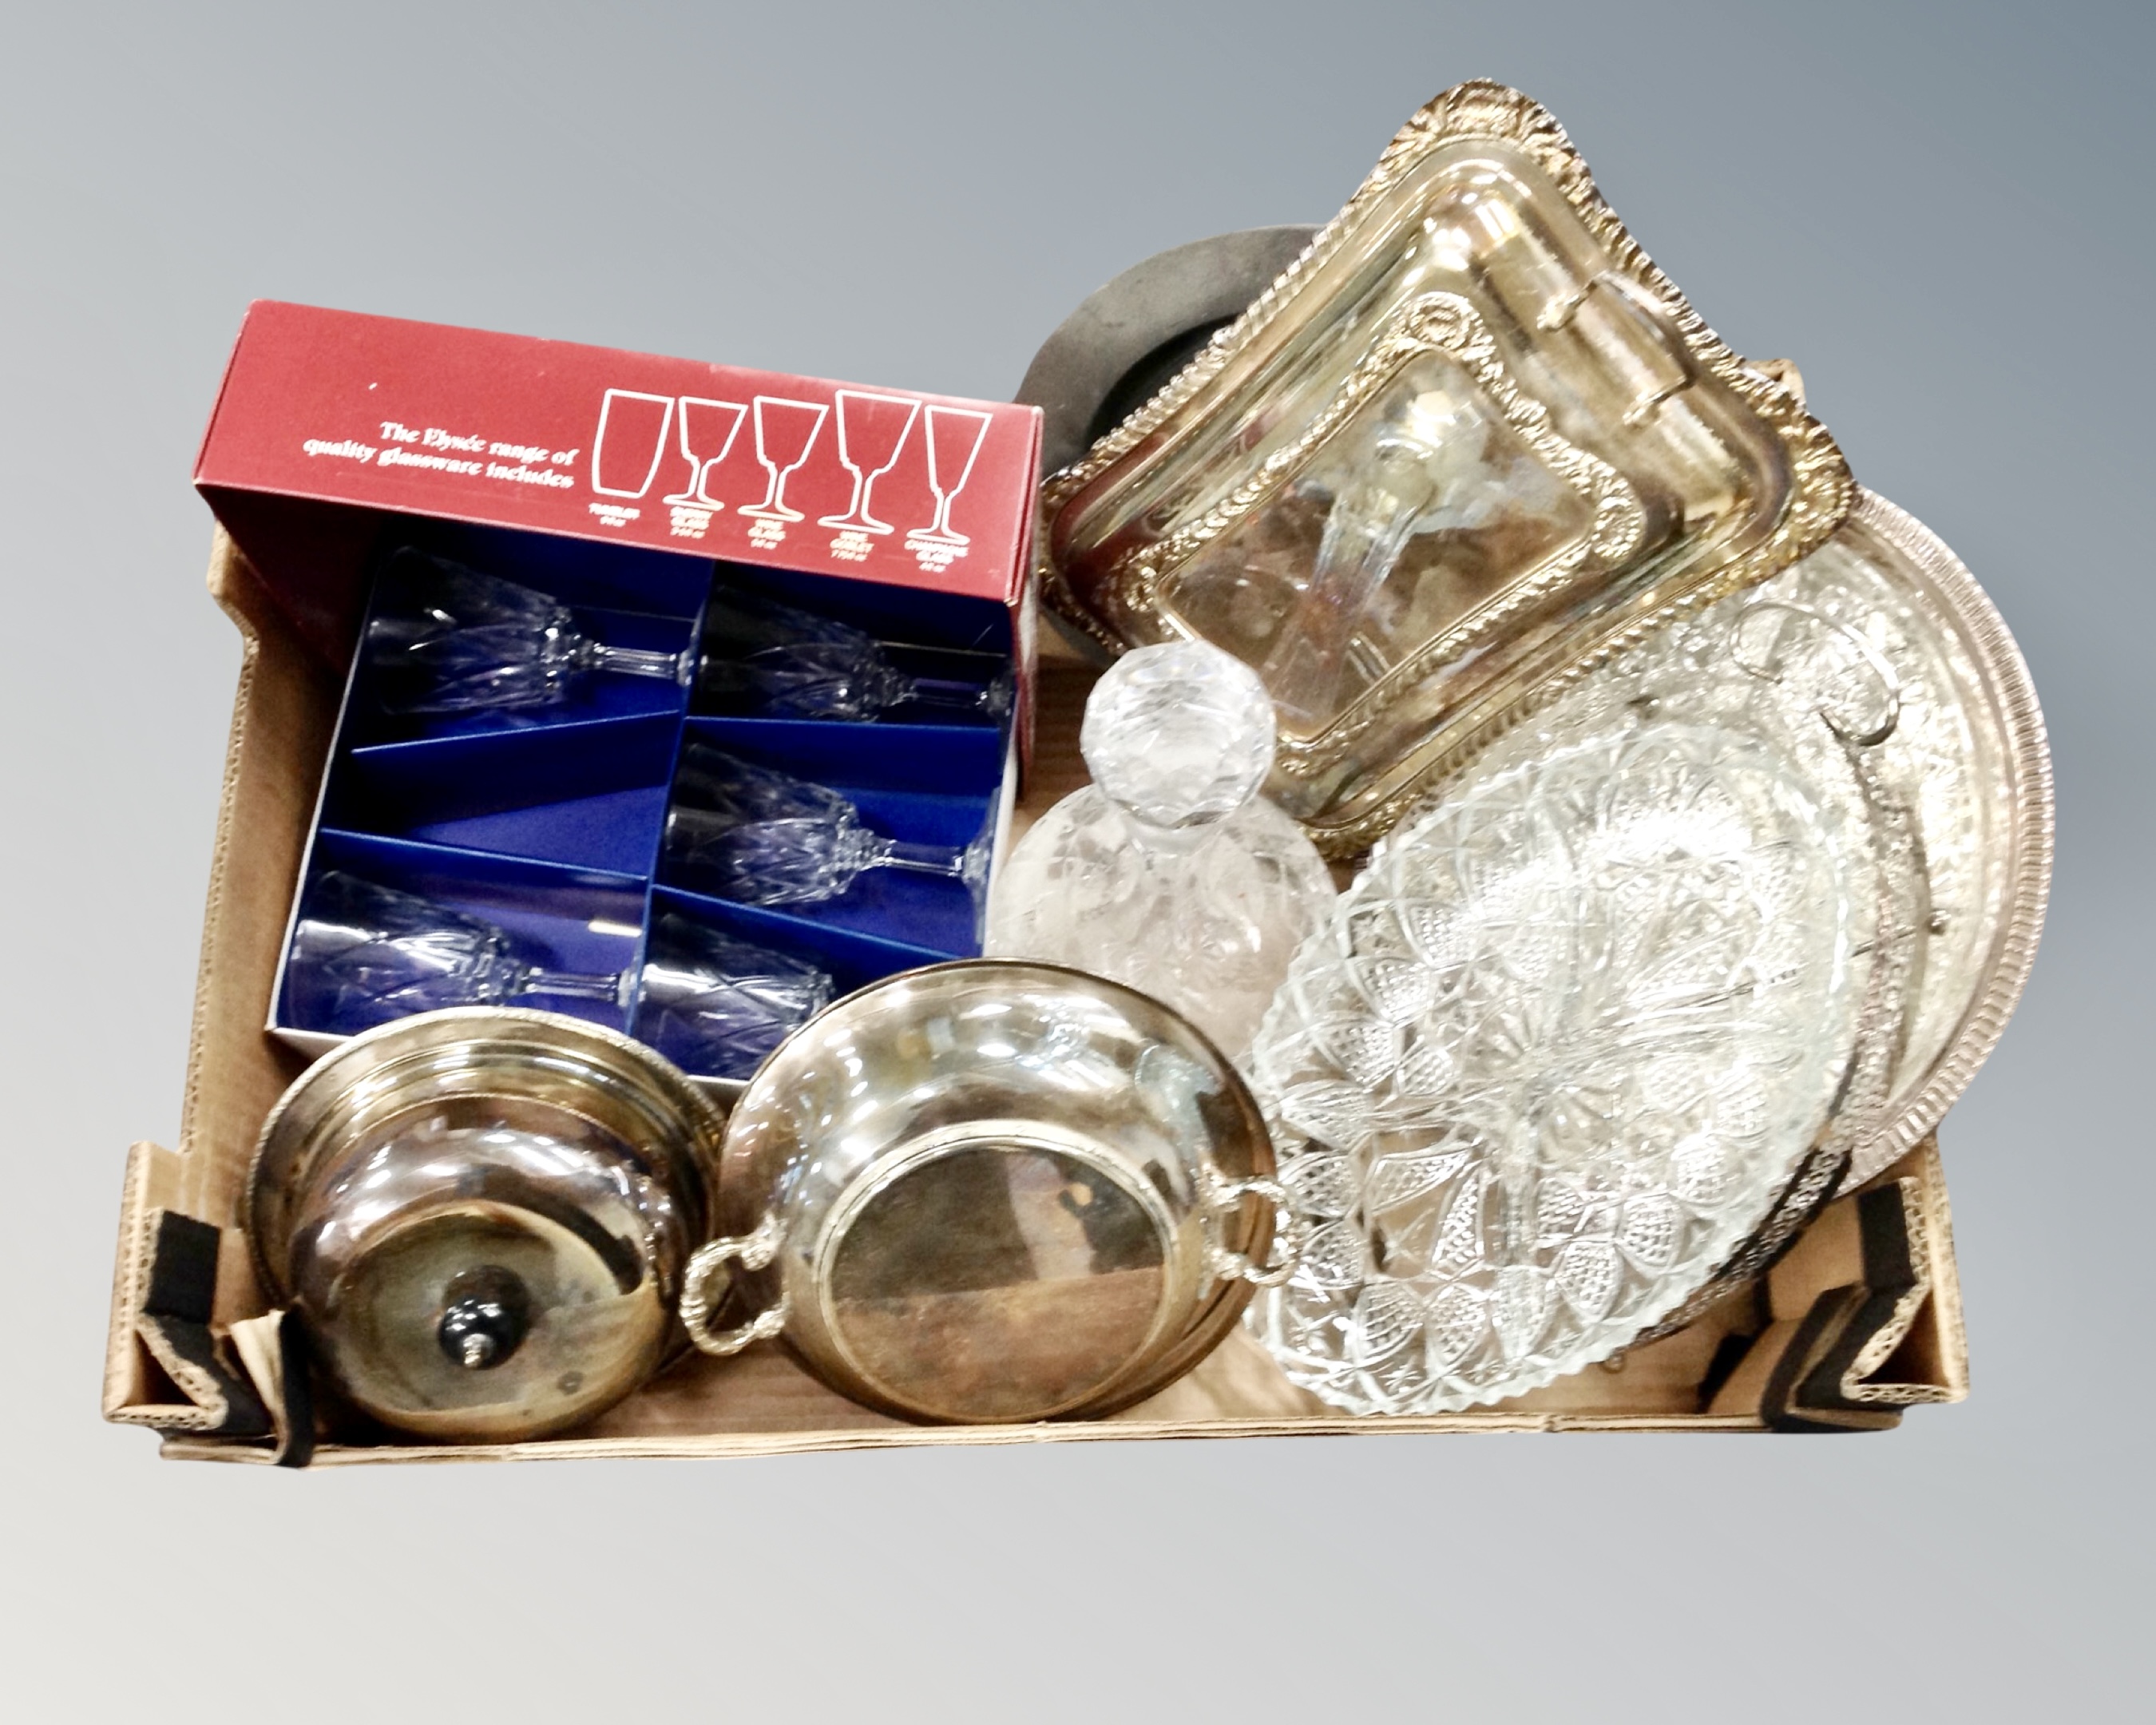 A box containing plated tureens, glass hors d'oeuvres dishes, boxed wine glasses and decanter.